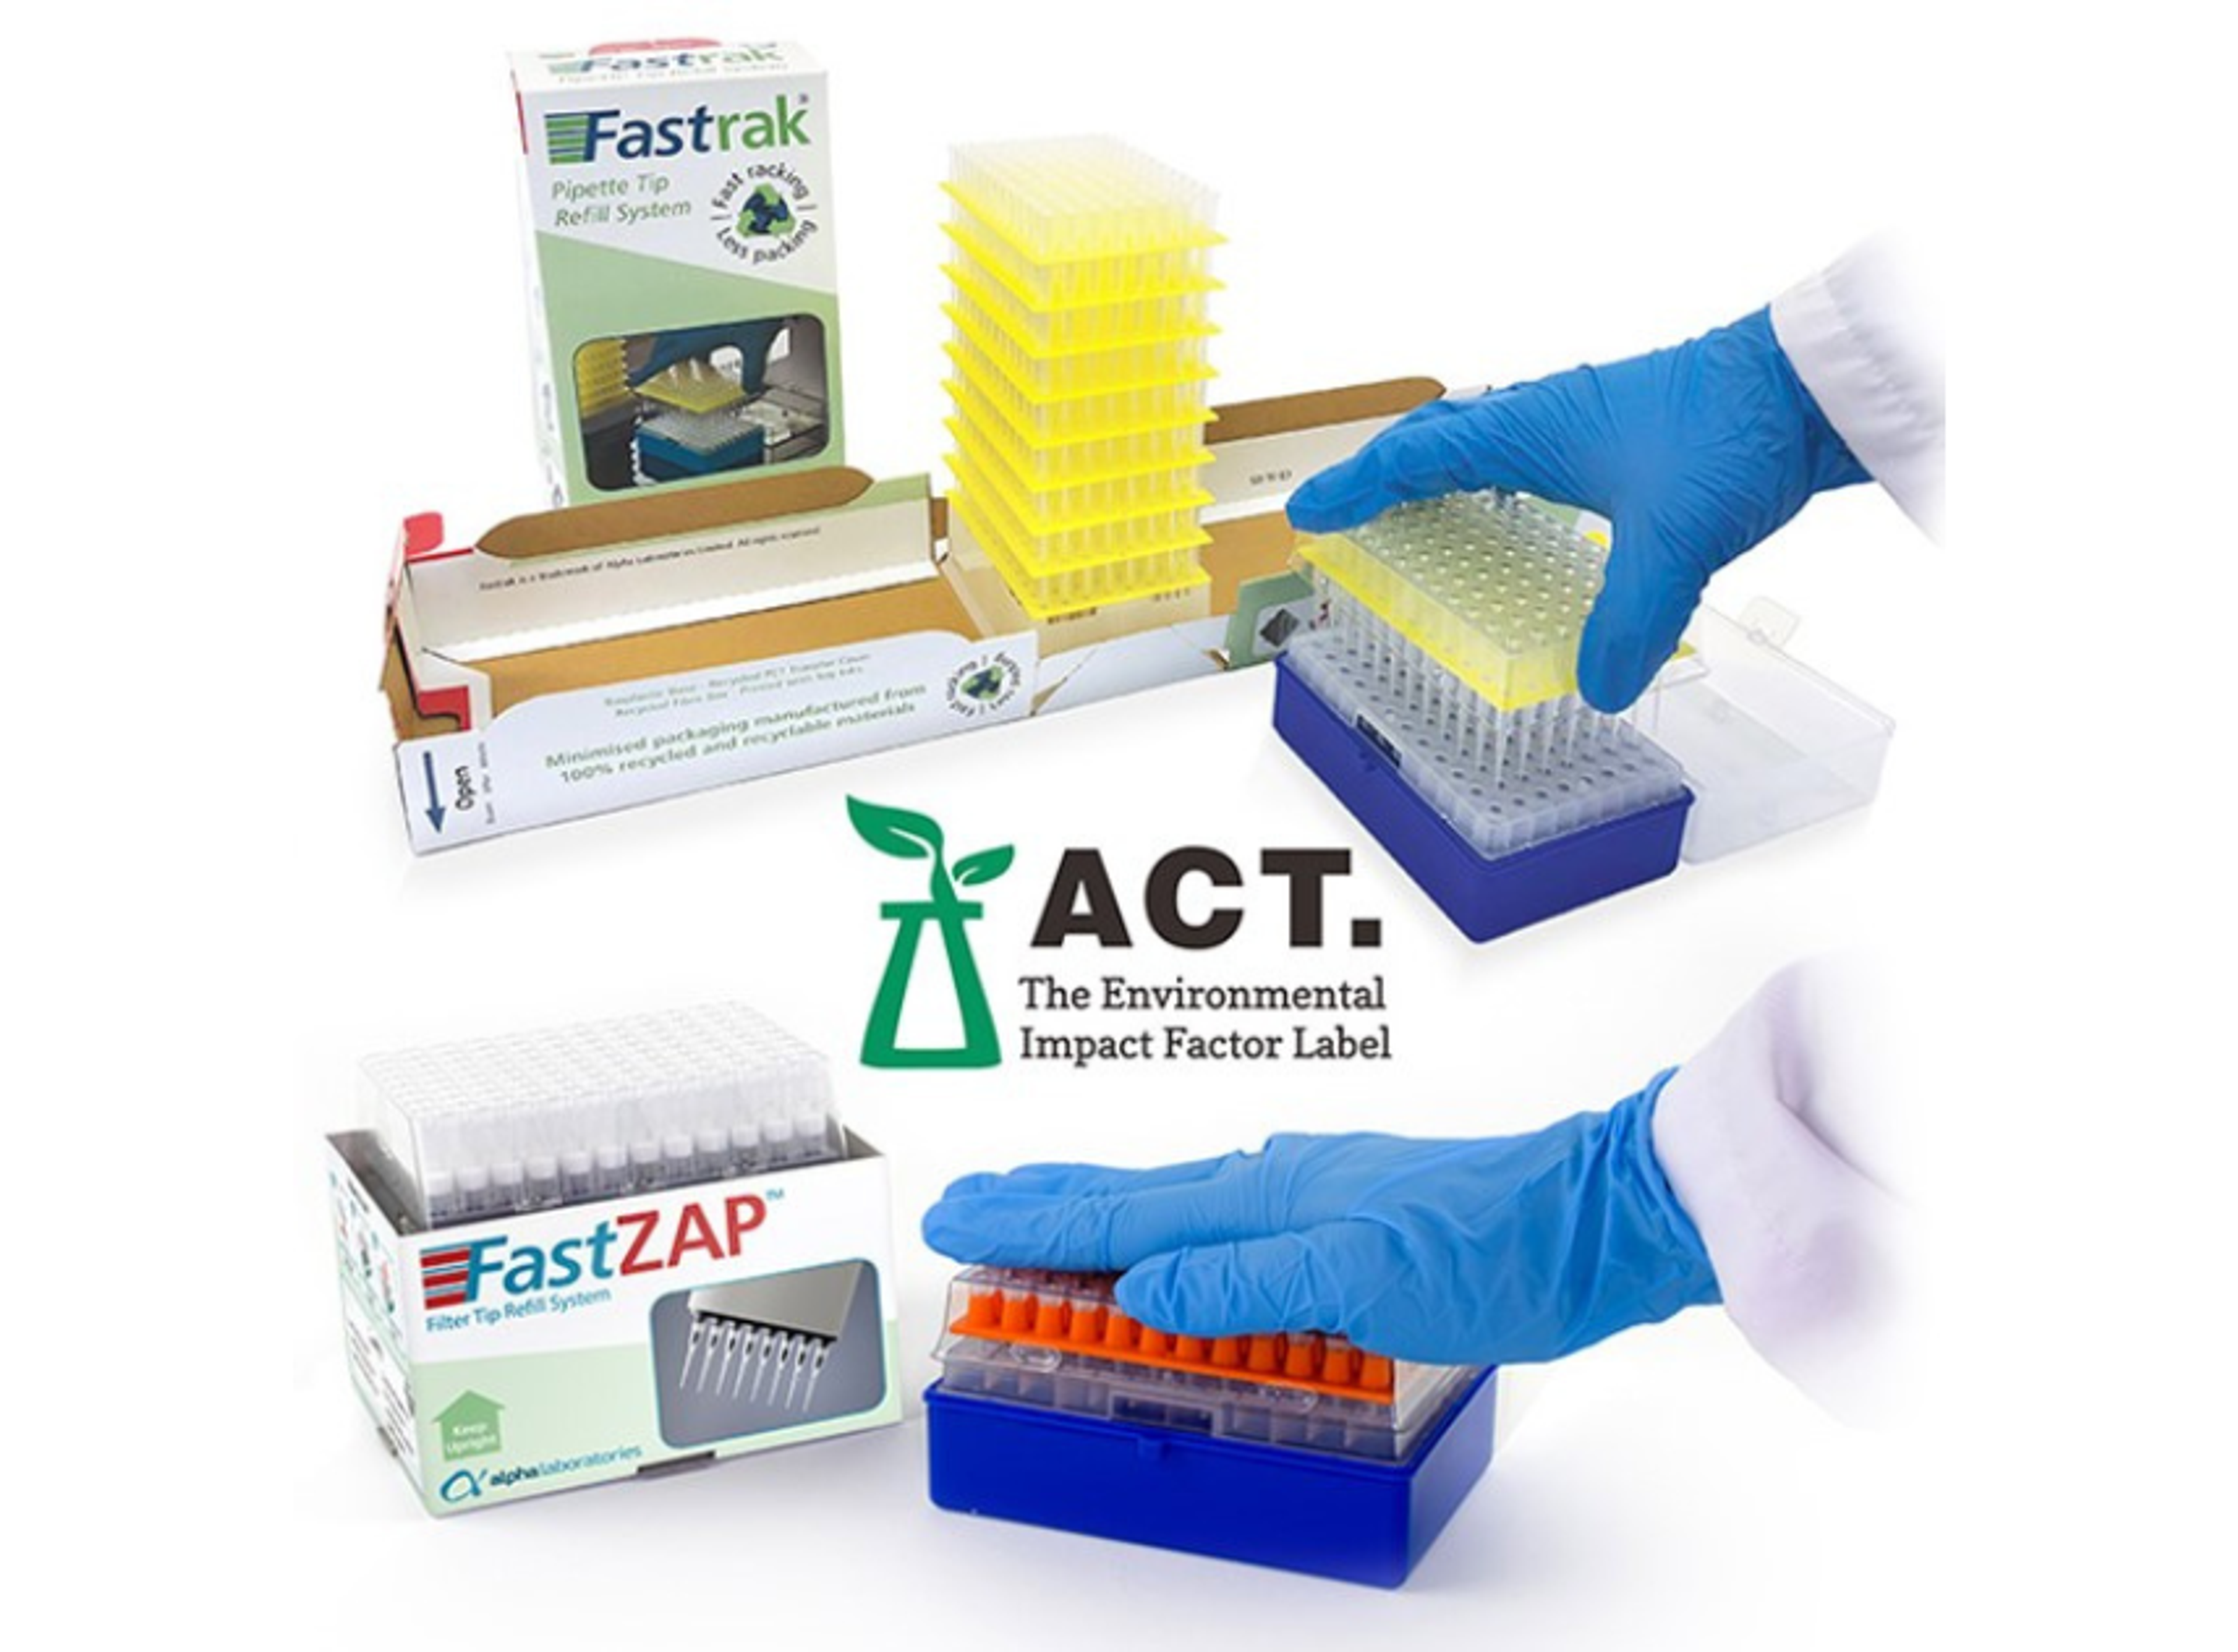 Fastrak® and FastZAP™ have received third party verification from My Green Lab